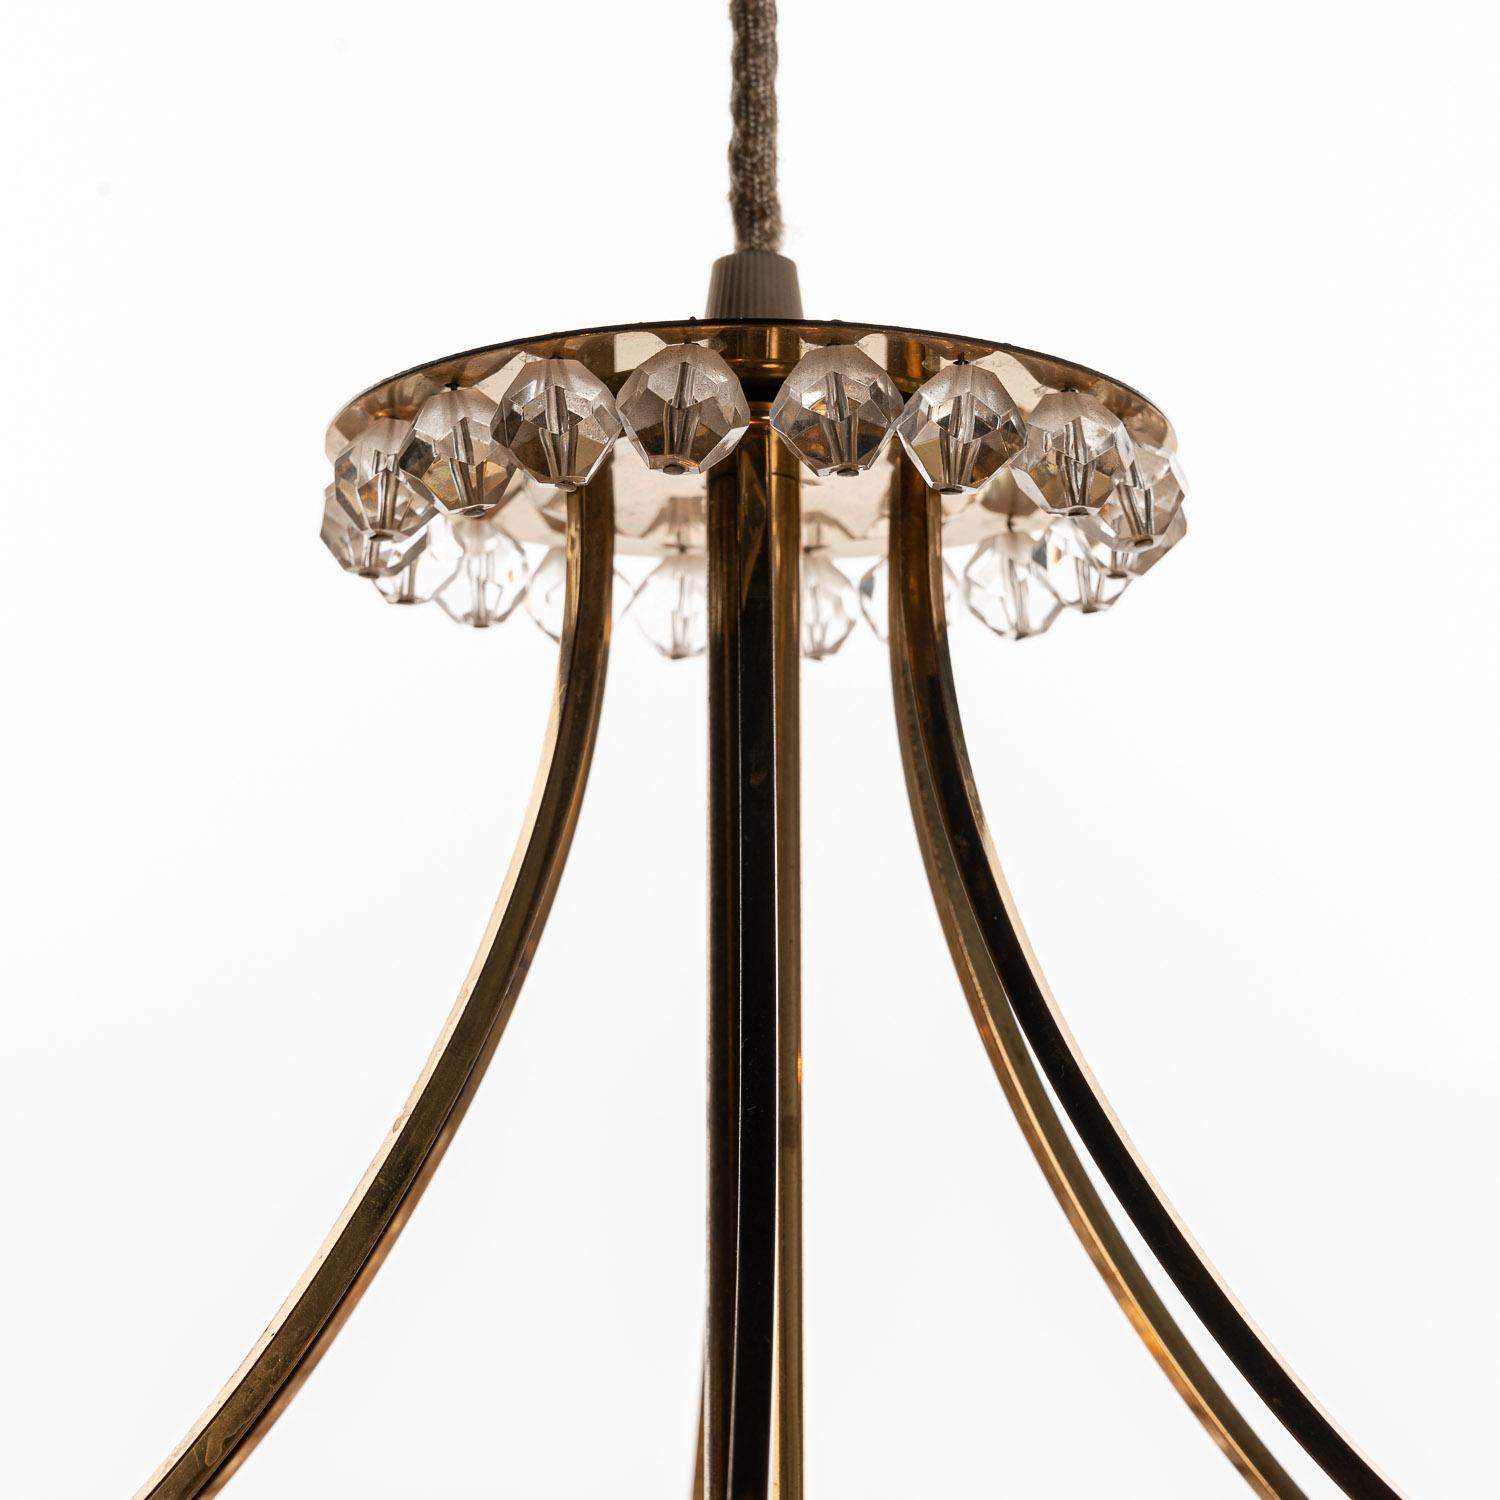 1950’s Brass, Lucite & Crystal Chandelier by Emil Stejnar for Rupert Nikoll In Good Condition For Sale In Schoorl, NL